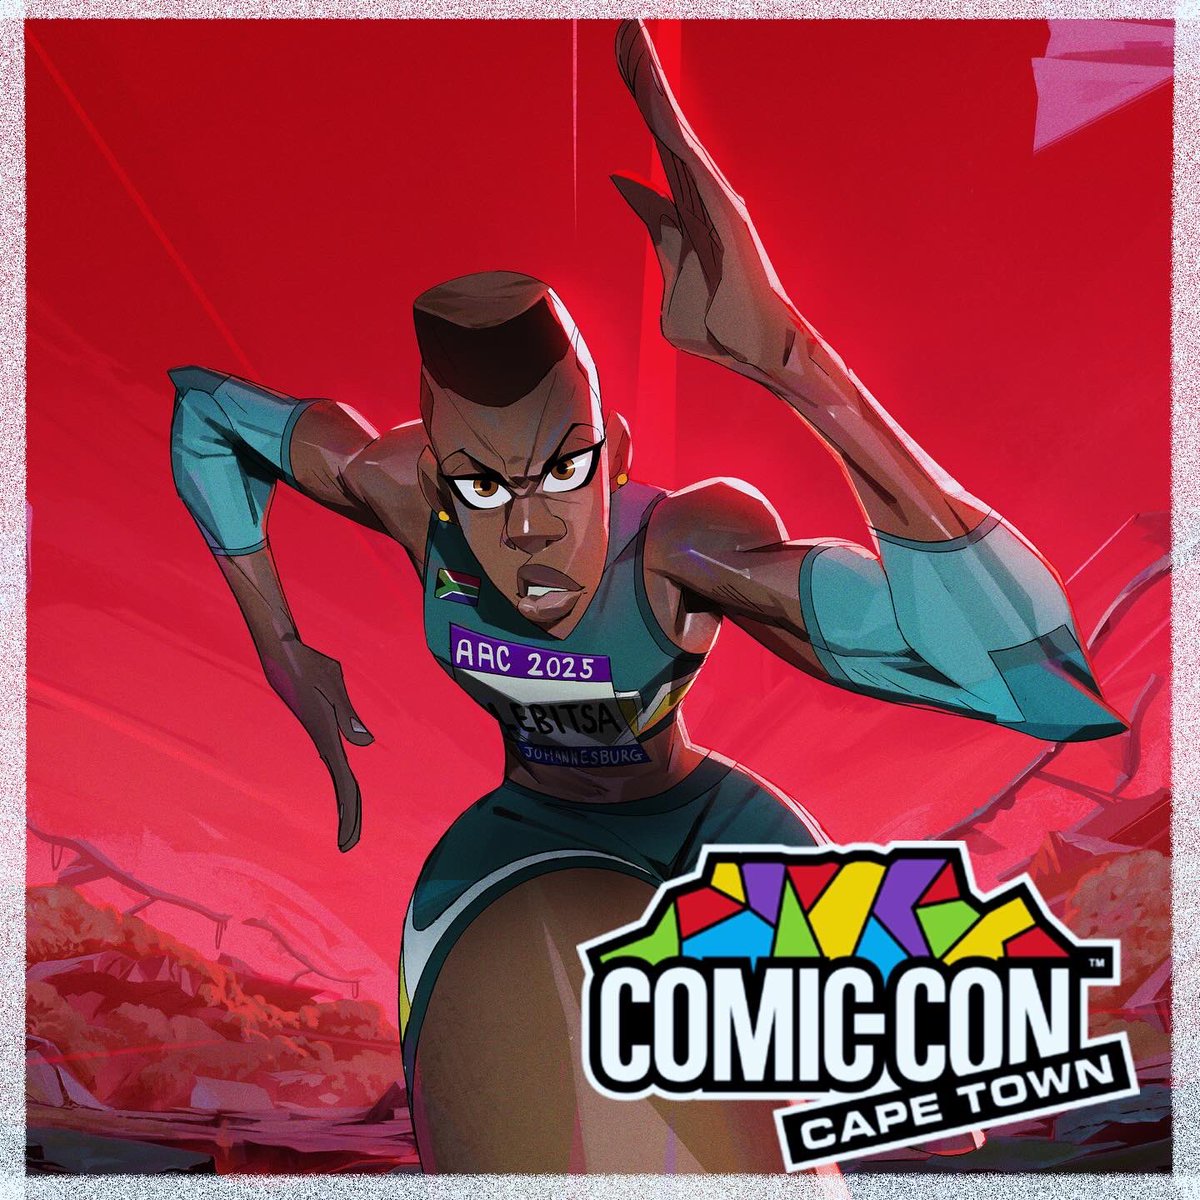 We are coming to @ComicConCPT next weekend! We’ll be there on some panels discussing NALEDI and the Kickstarter campaign which would have launched! Just 4 DAYS LEFT!! See you there! #indieanimation #naledifilm